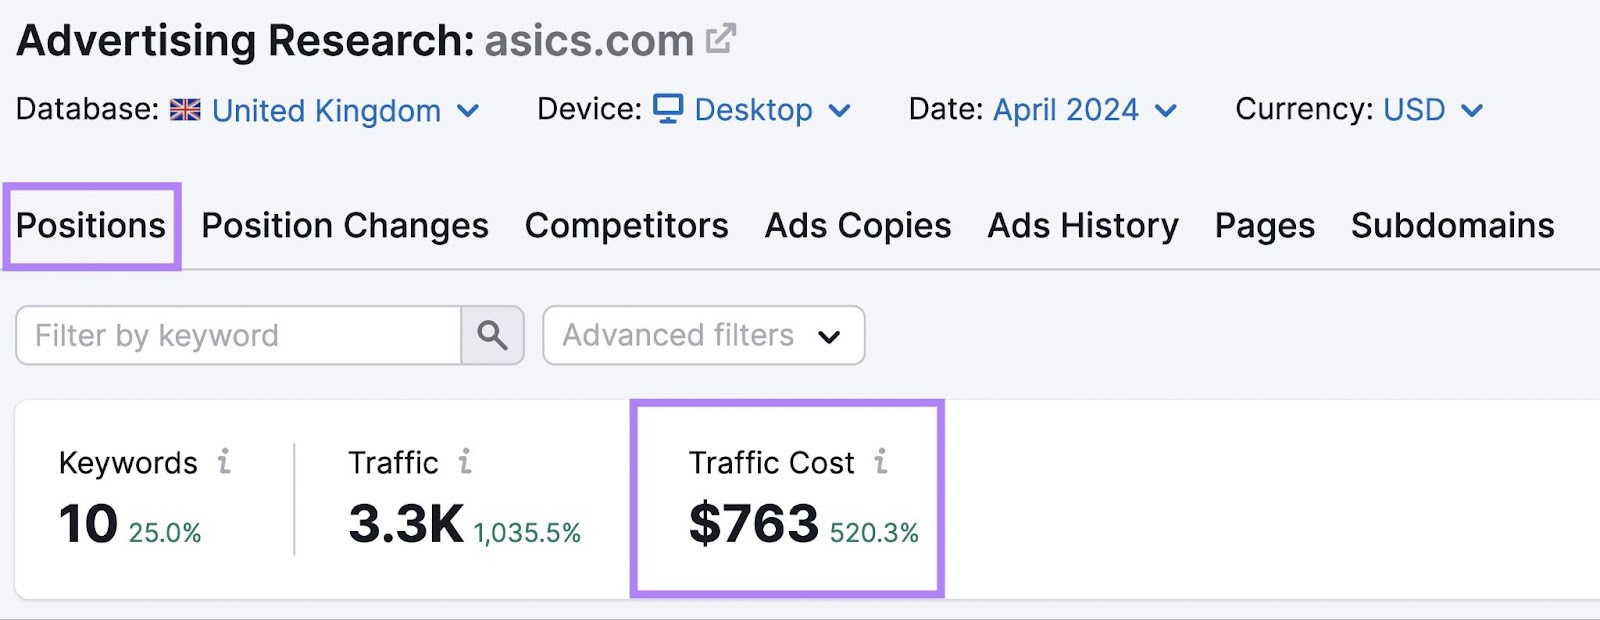 Traffic cost of $763 highlighted for asics.com in Semrush Advertising Research tool